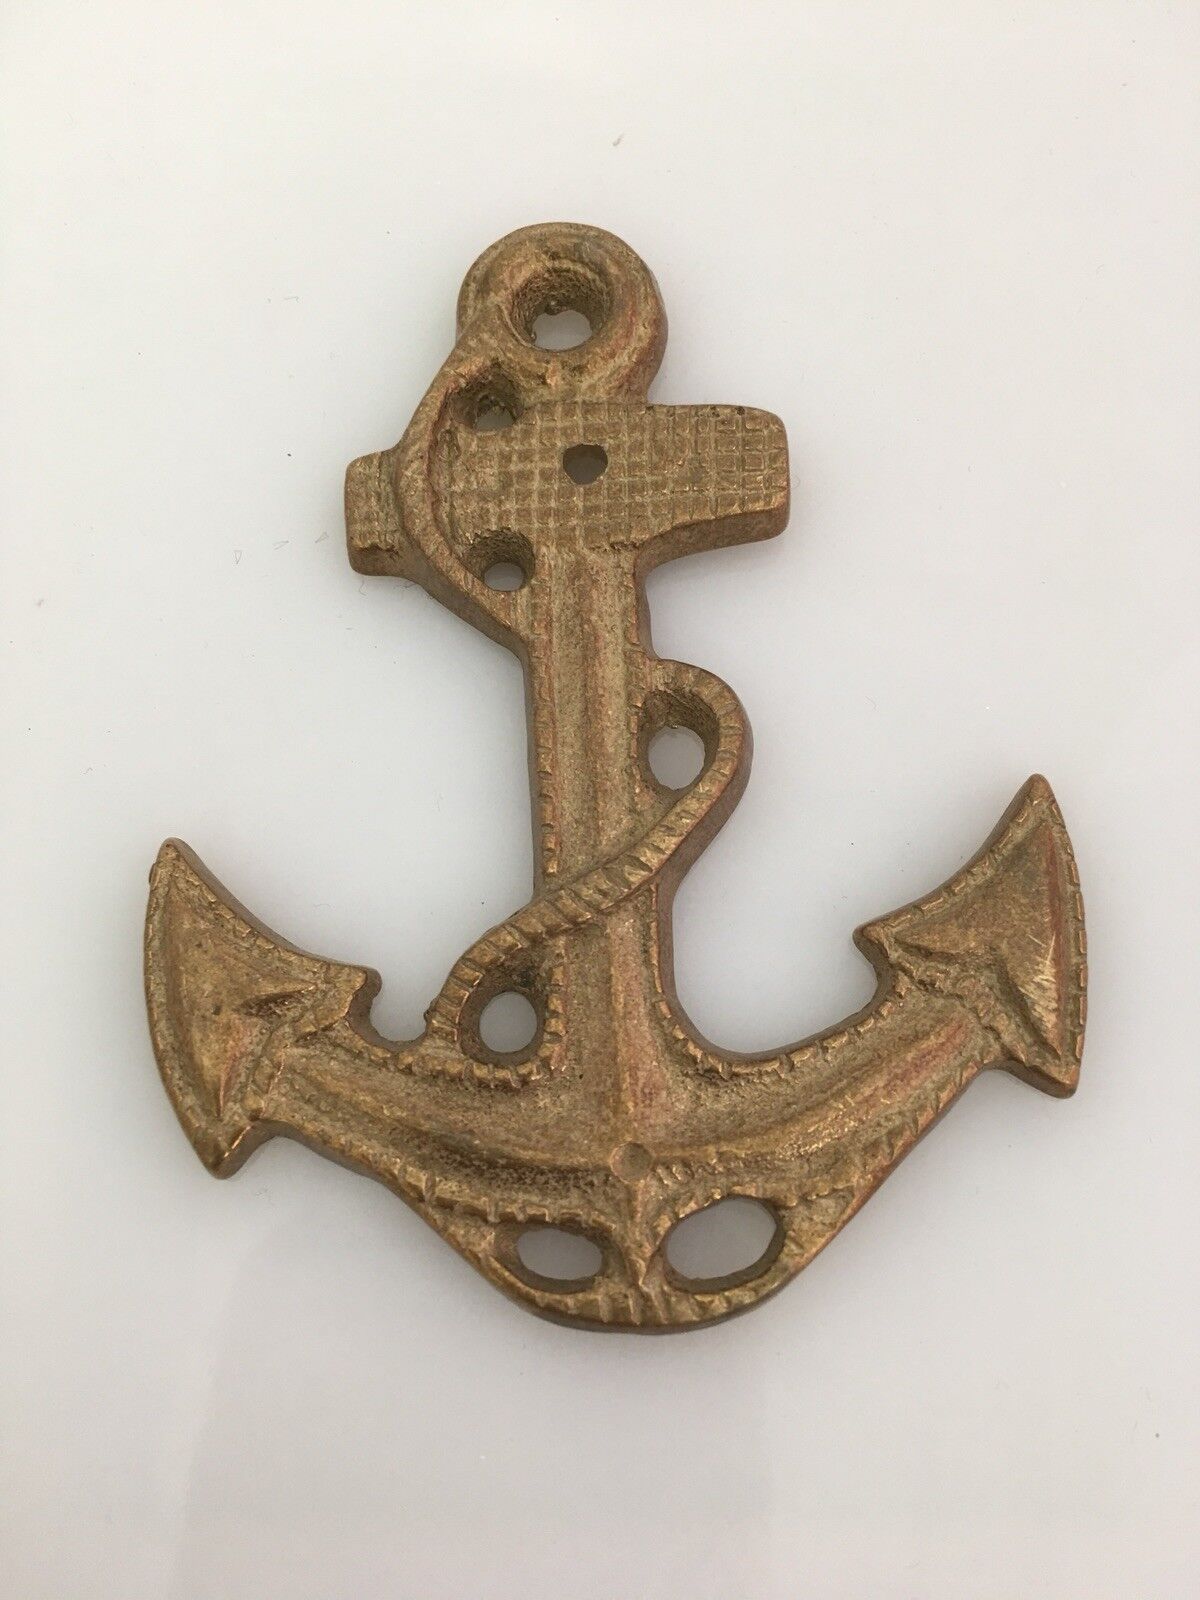 Vintage Solid brass anchor wall nautical decoration boat decor marine ship mount